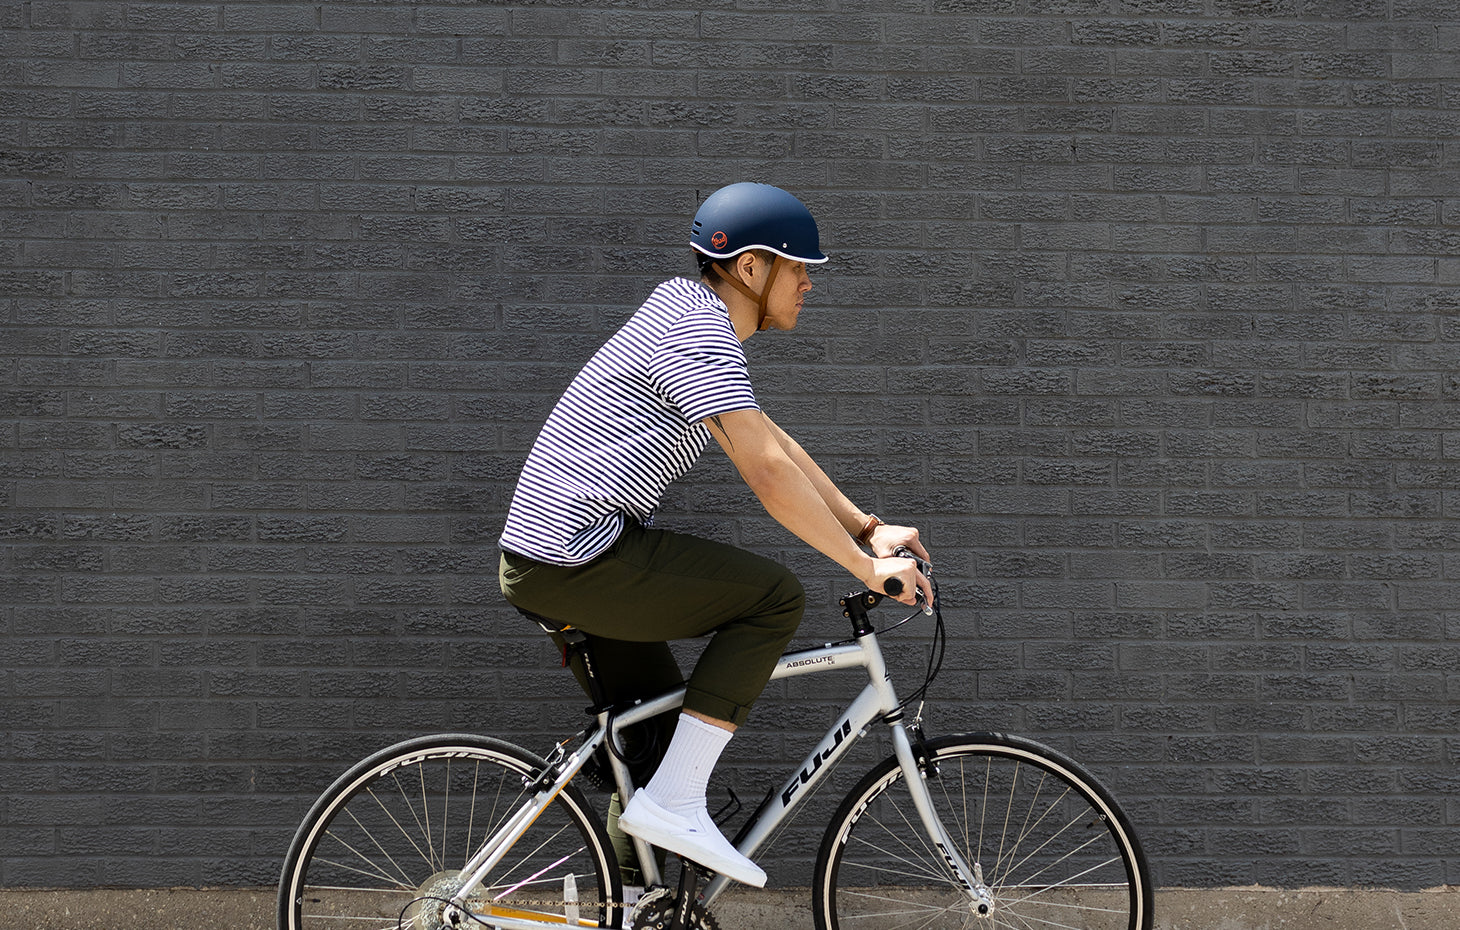 Thousand IRL: Person riding a bike and wearing a Thousand Navy helmet